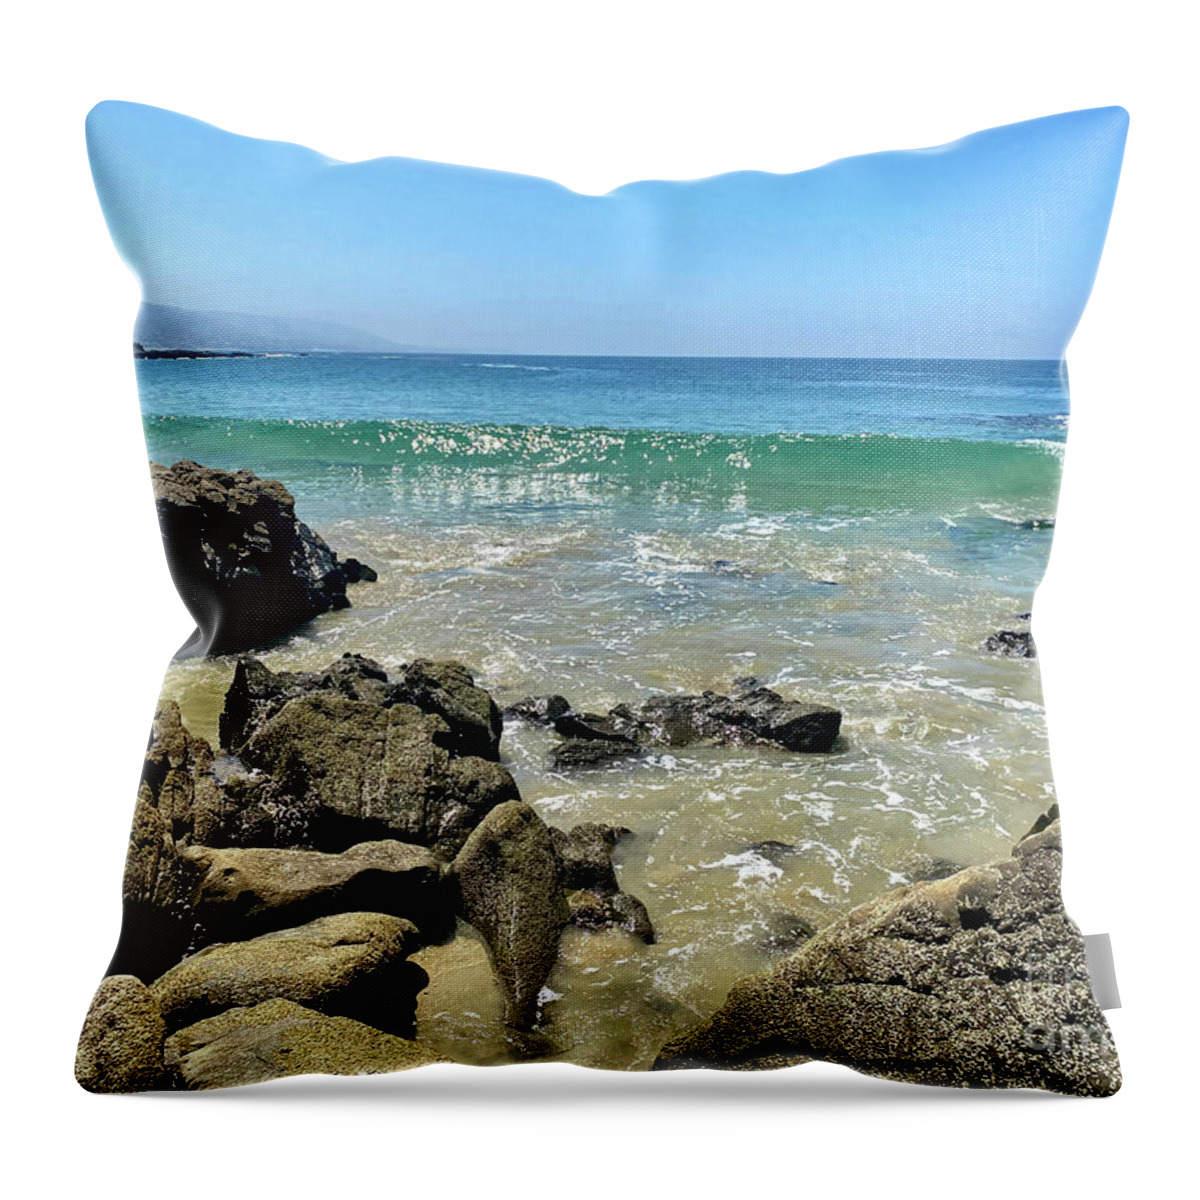 Water Throw Pillow featuring the photograph Sparkling Wave Washes Ashore by Katherine Erickson